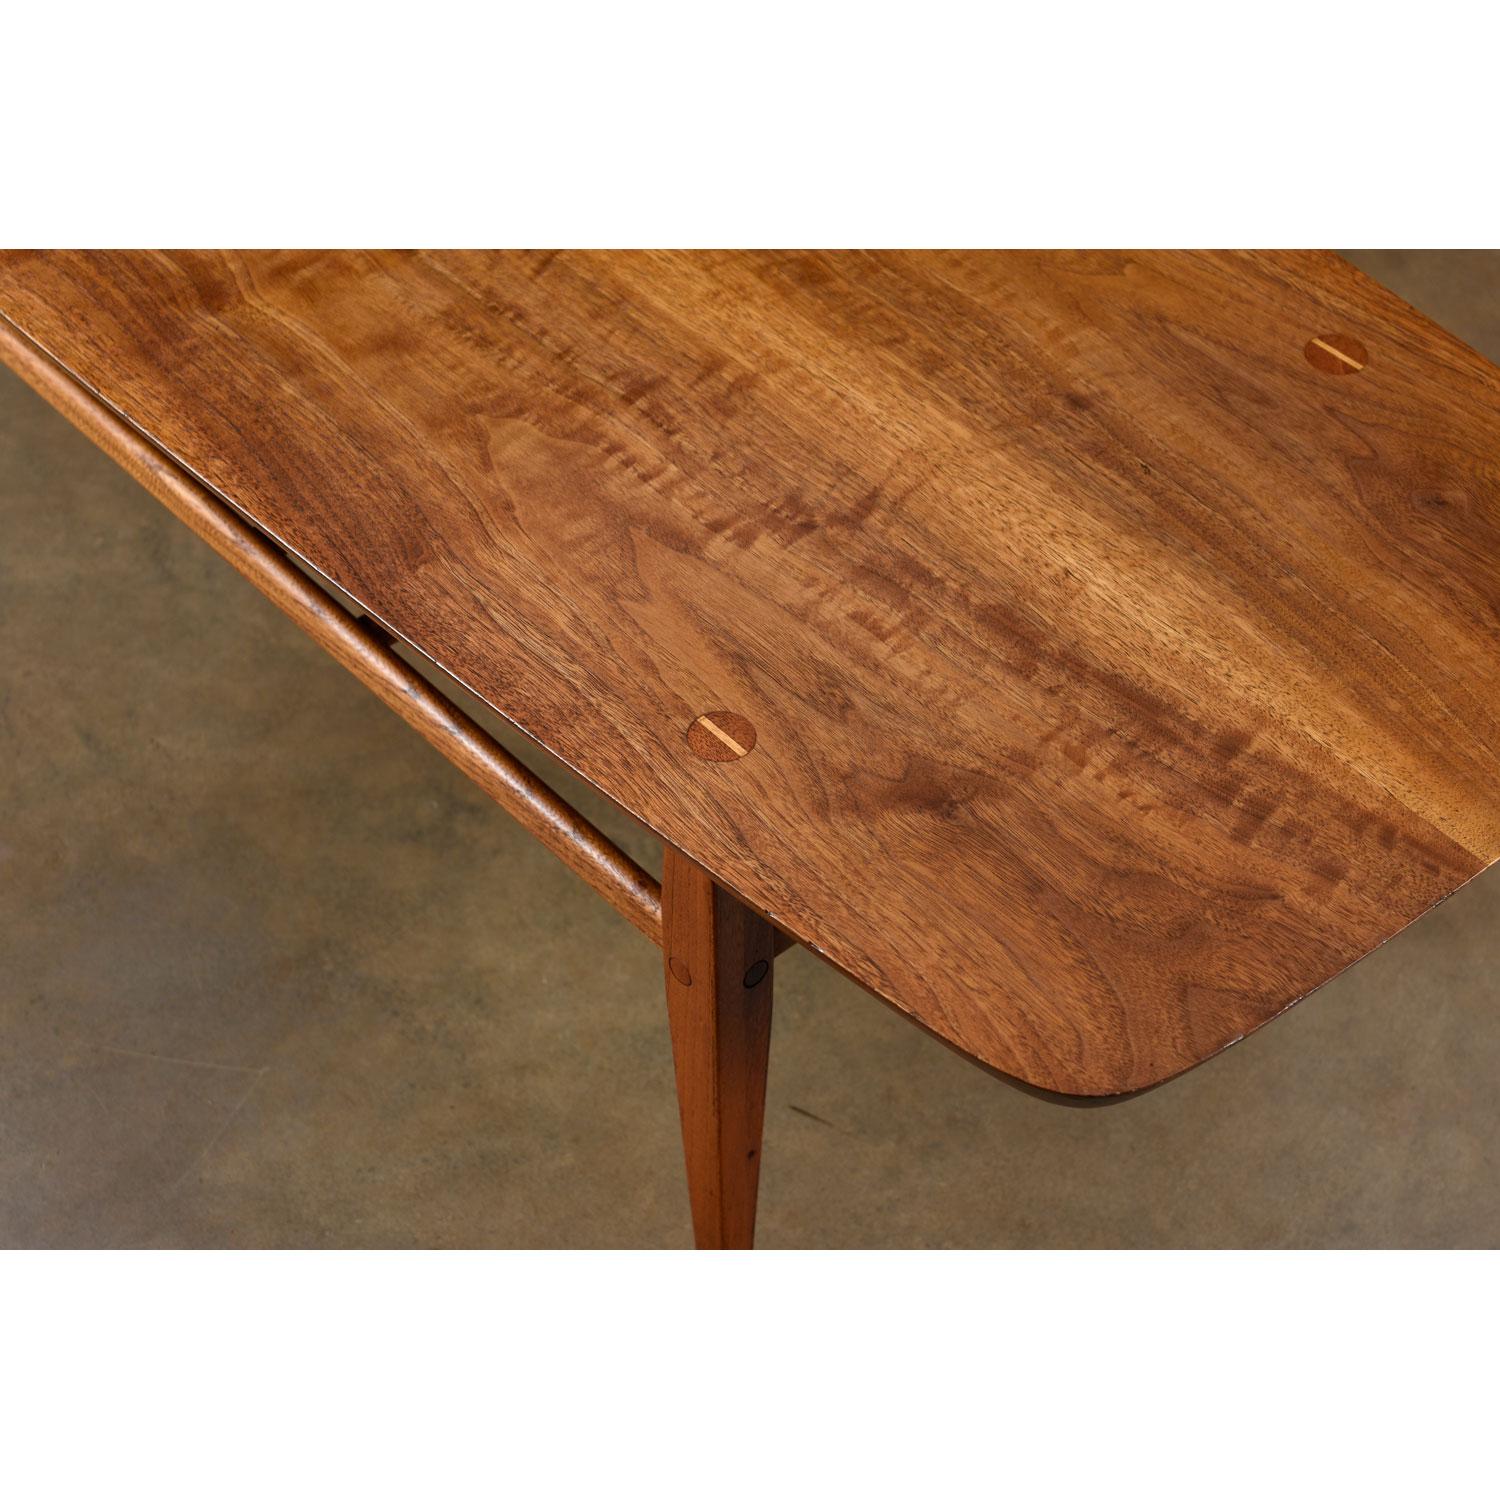 American Restored Mid-Century Modern Lane Accent Tiered Walnut Coffee Table